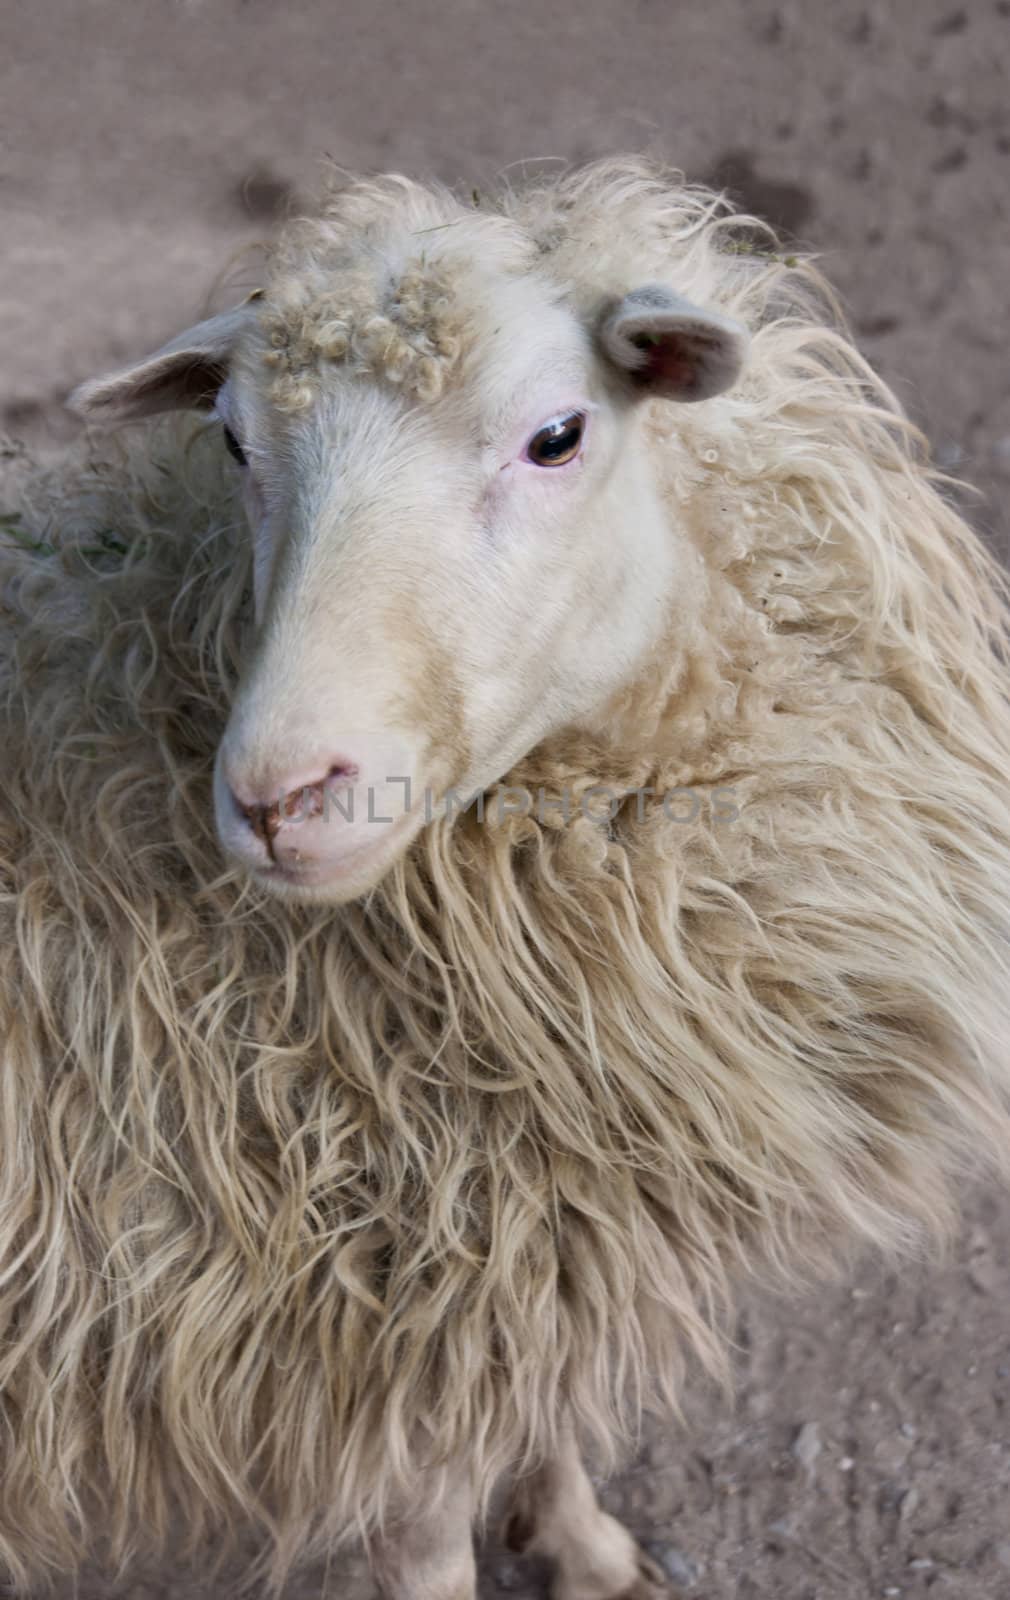 Close up of a sheep looking into the camera